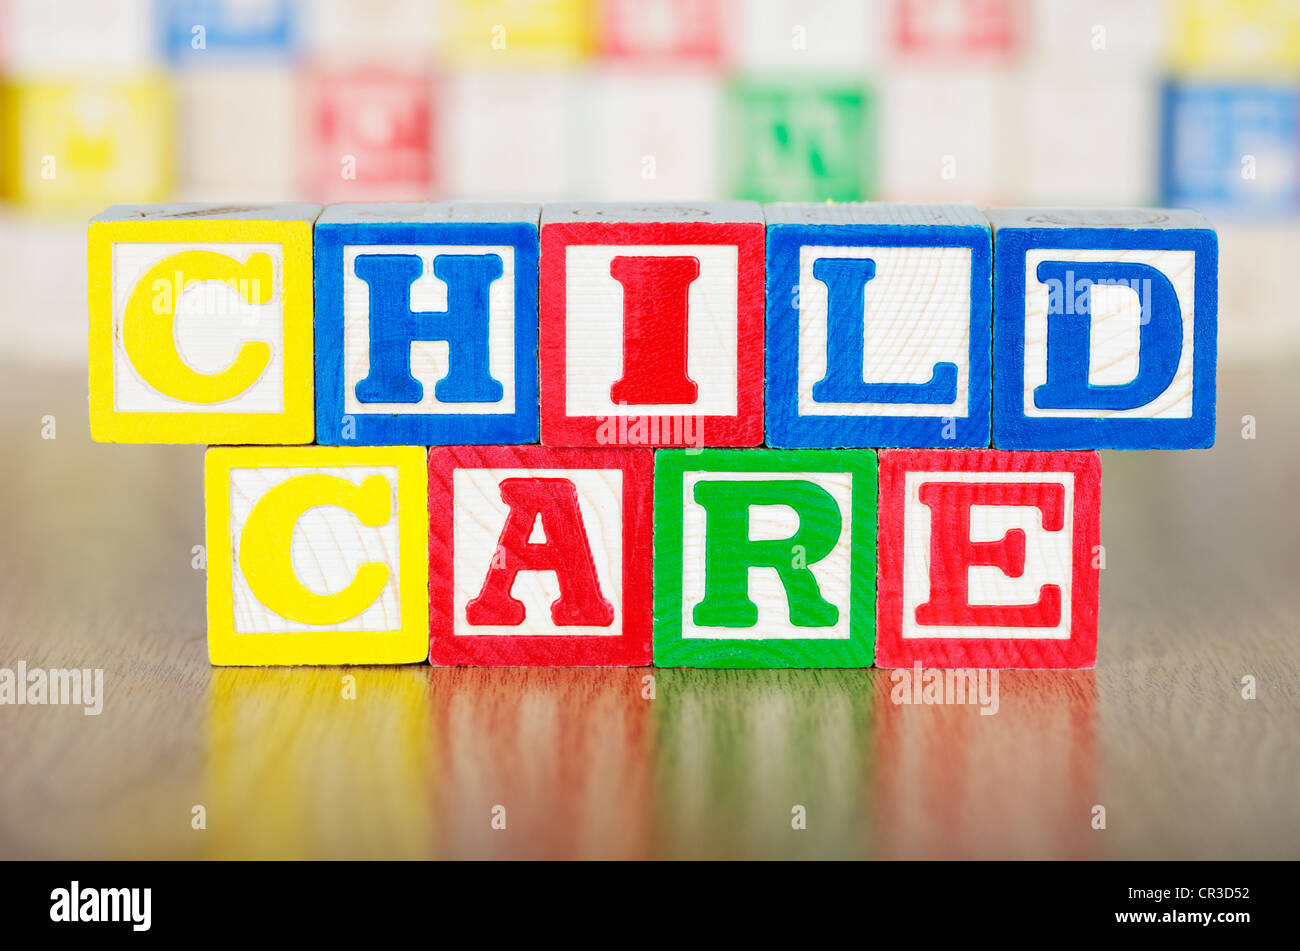 Child Care Spelled Out in Alphabet Building Blocks Stock Photo - Alamy